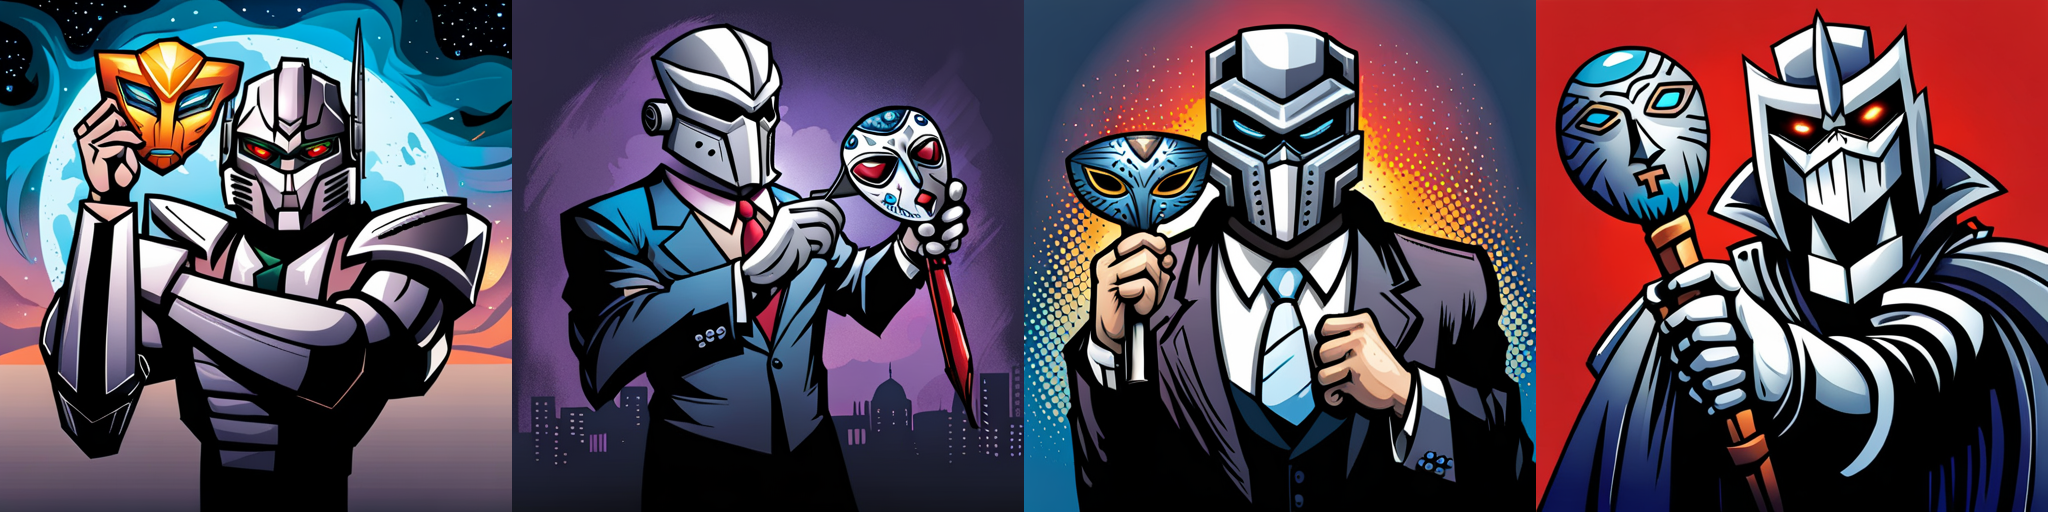 Four transformer characters holding up masks, drawn in comic style